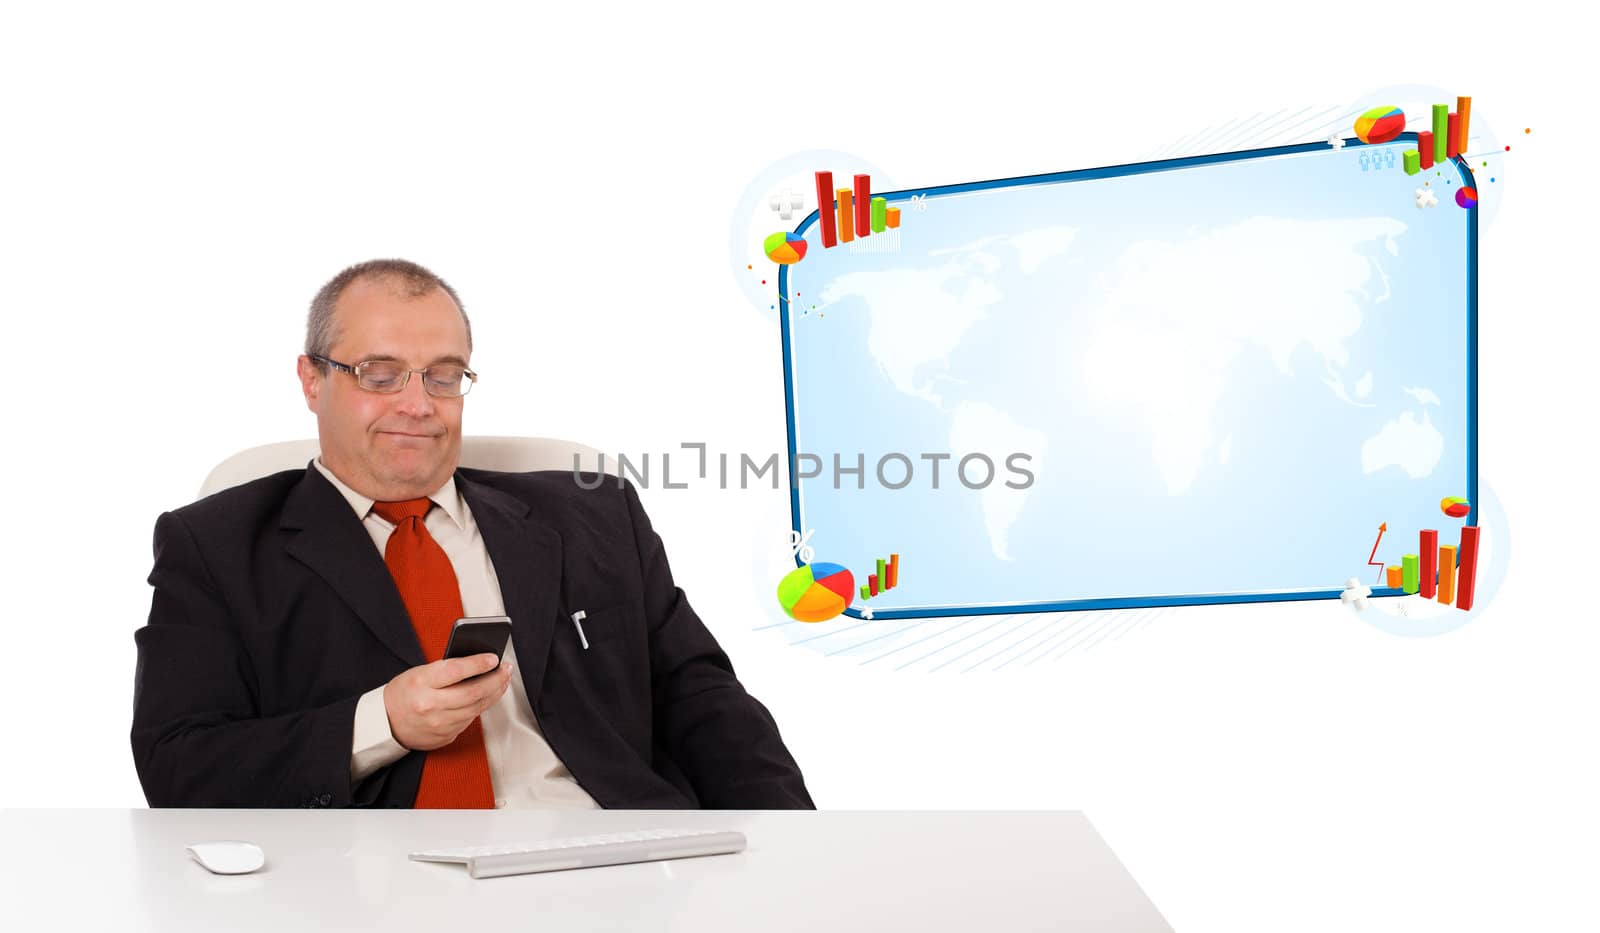 businessman sitting at desk and holding a mobilephone with copy space, isolated on white